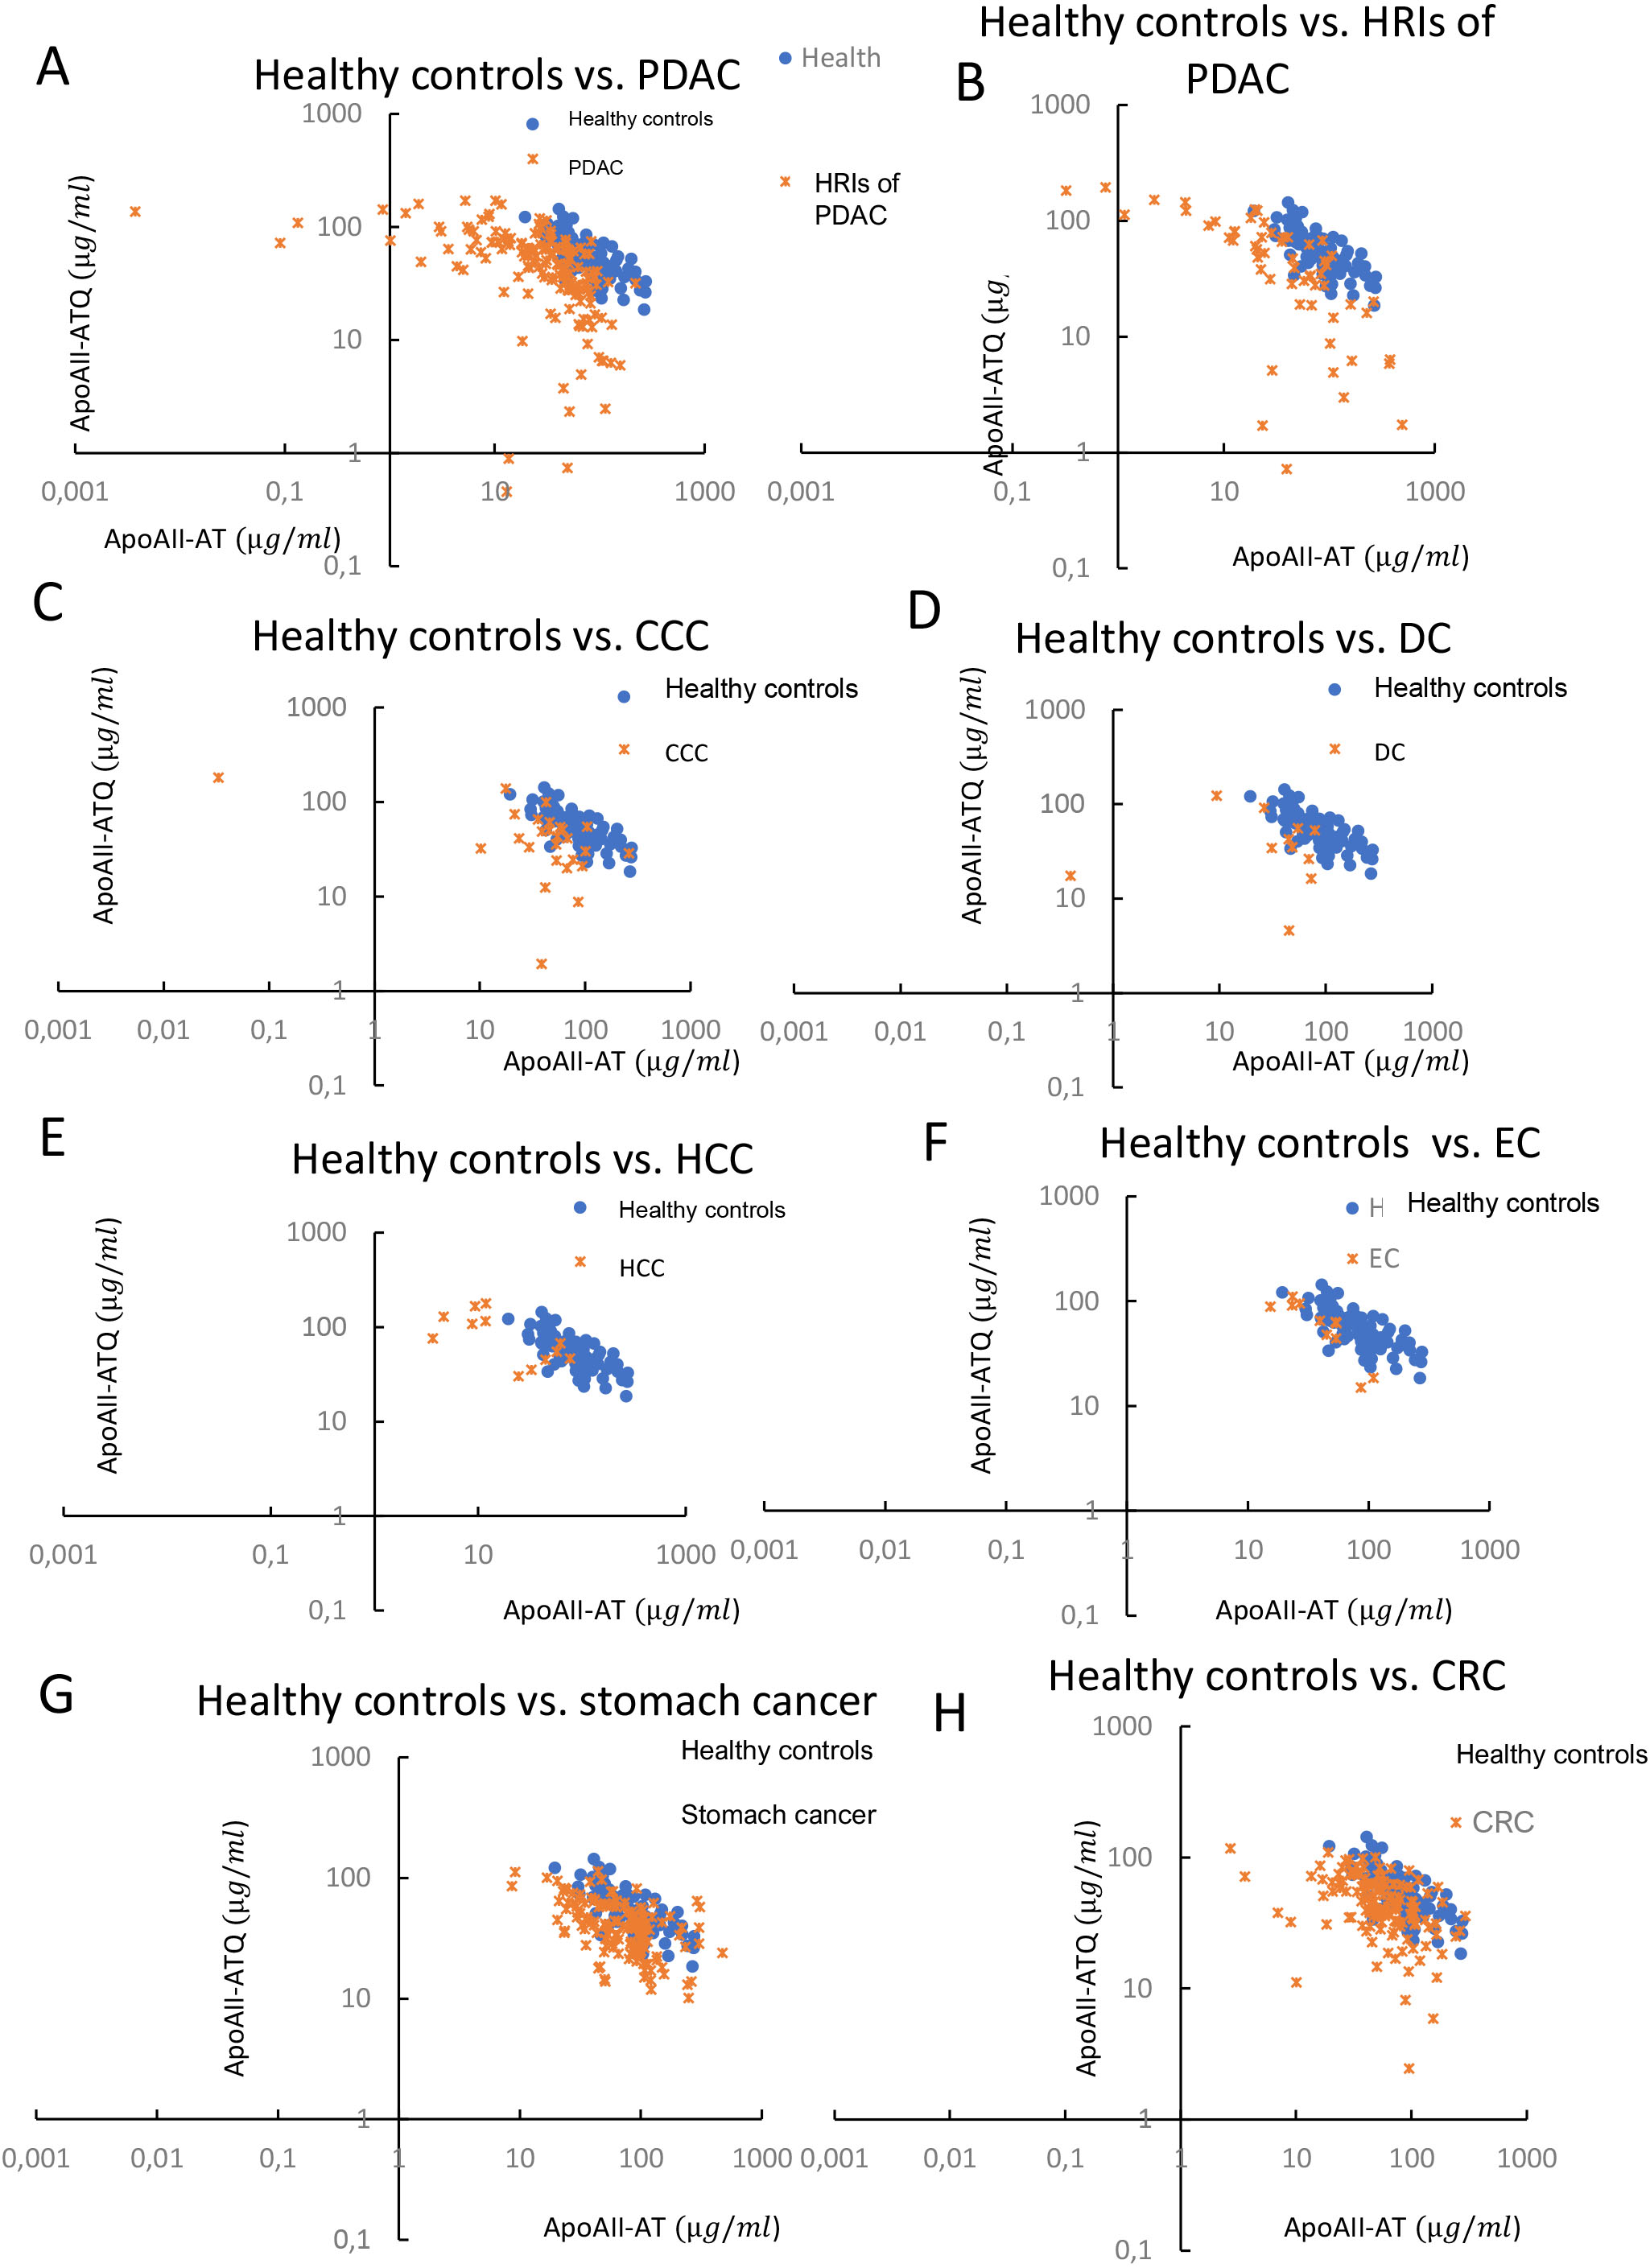 Two-dimensional scatterplots of heavy (apoA2-ATQ/ATQ) and light (apoA2-AT/AT) apoA2 homodimers in the gastrointestinal (GI) cancers and HRIs that were enrolled in the multi-institutional Japanese study [14]. Healthy controls (blue circles) versus GI cancer and HRIs (Orange crosses). (A) Healthy controls versus PDAC, (B) healthy controls versus HRIs including IPMN and chronic pancreatitis, (C) healthy controls versus cholangiocellular carcinoma (CCC), (D) healthy controls versus duodenal cancer (DC), (E) healthy controls versus hepatocellular carcinoma (HCC), (F) healthy controls versus esophageal cancer (EC), (G) healthy controls versus stomach cancer, and (H) healthy controls versus colorectal cancer (CRC). 